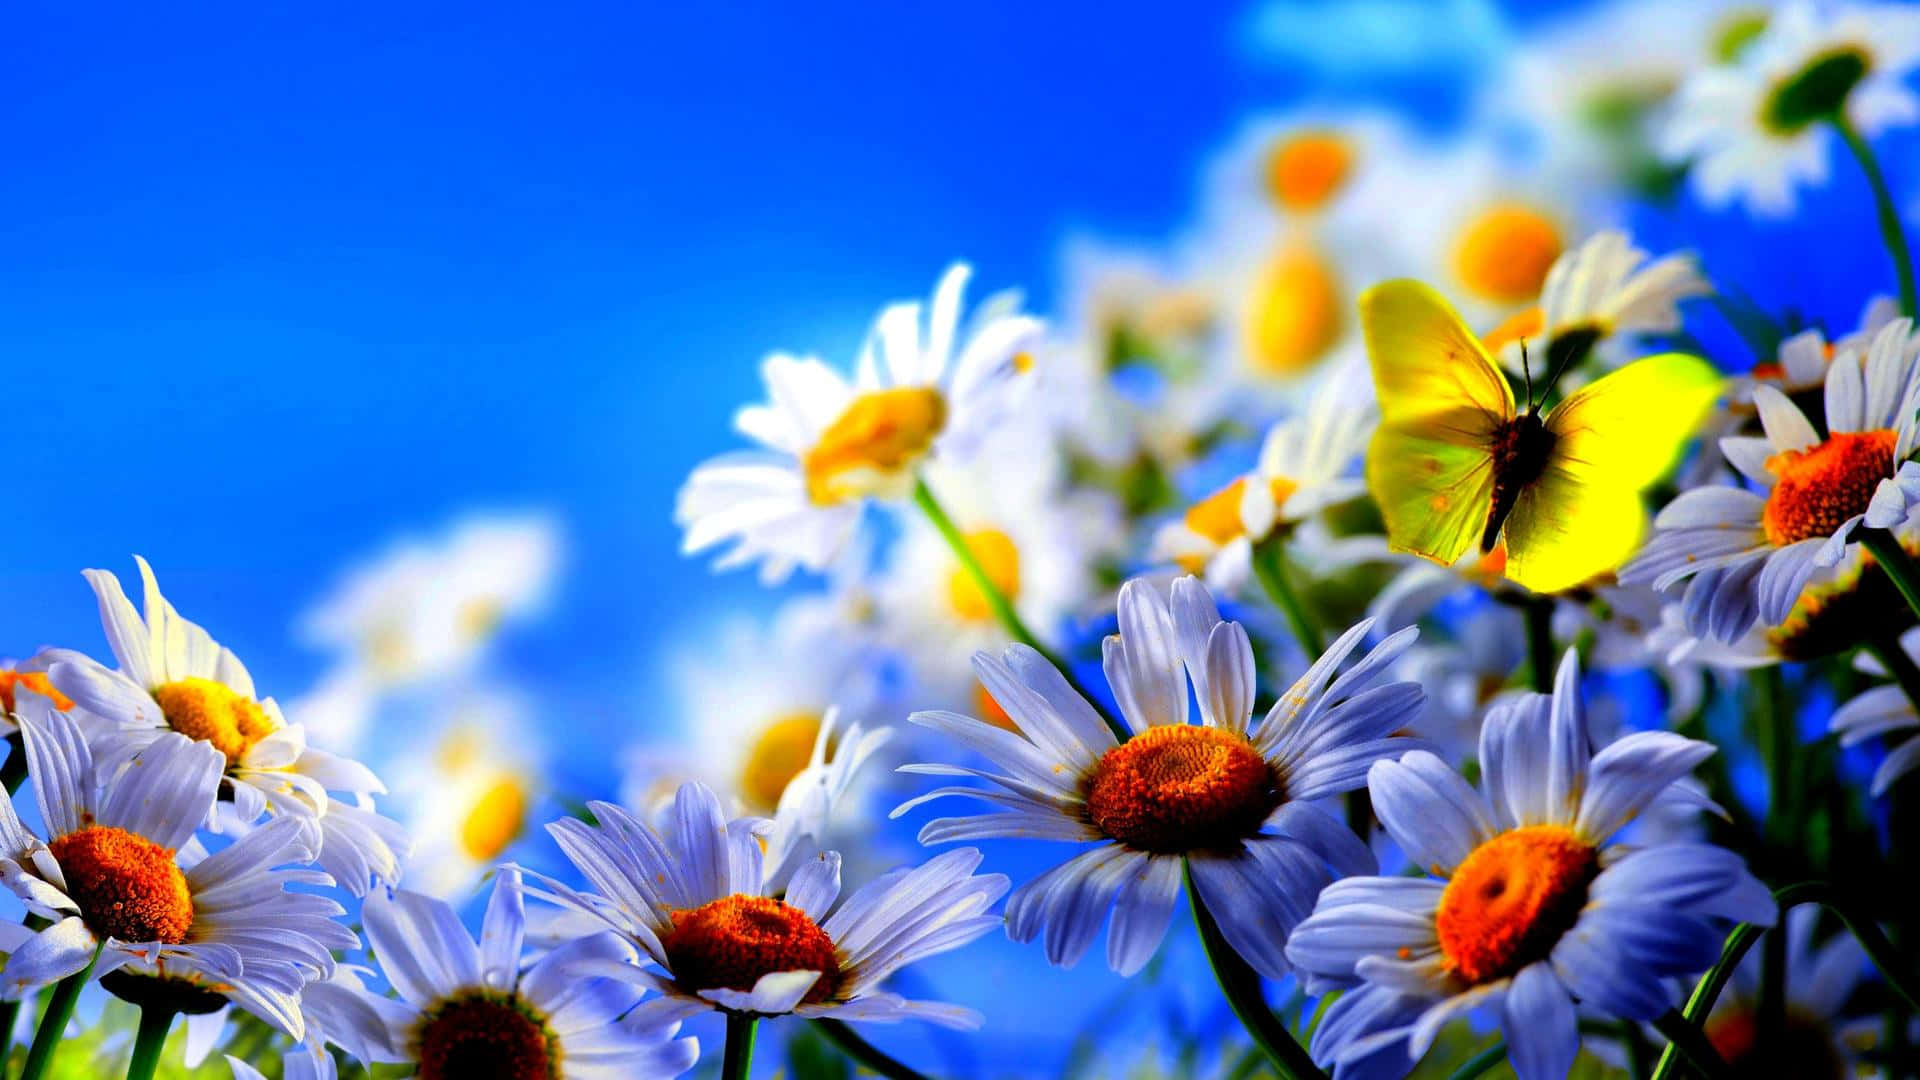 A vibrant and colourful flower in full bloom Wallpaper